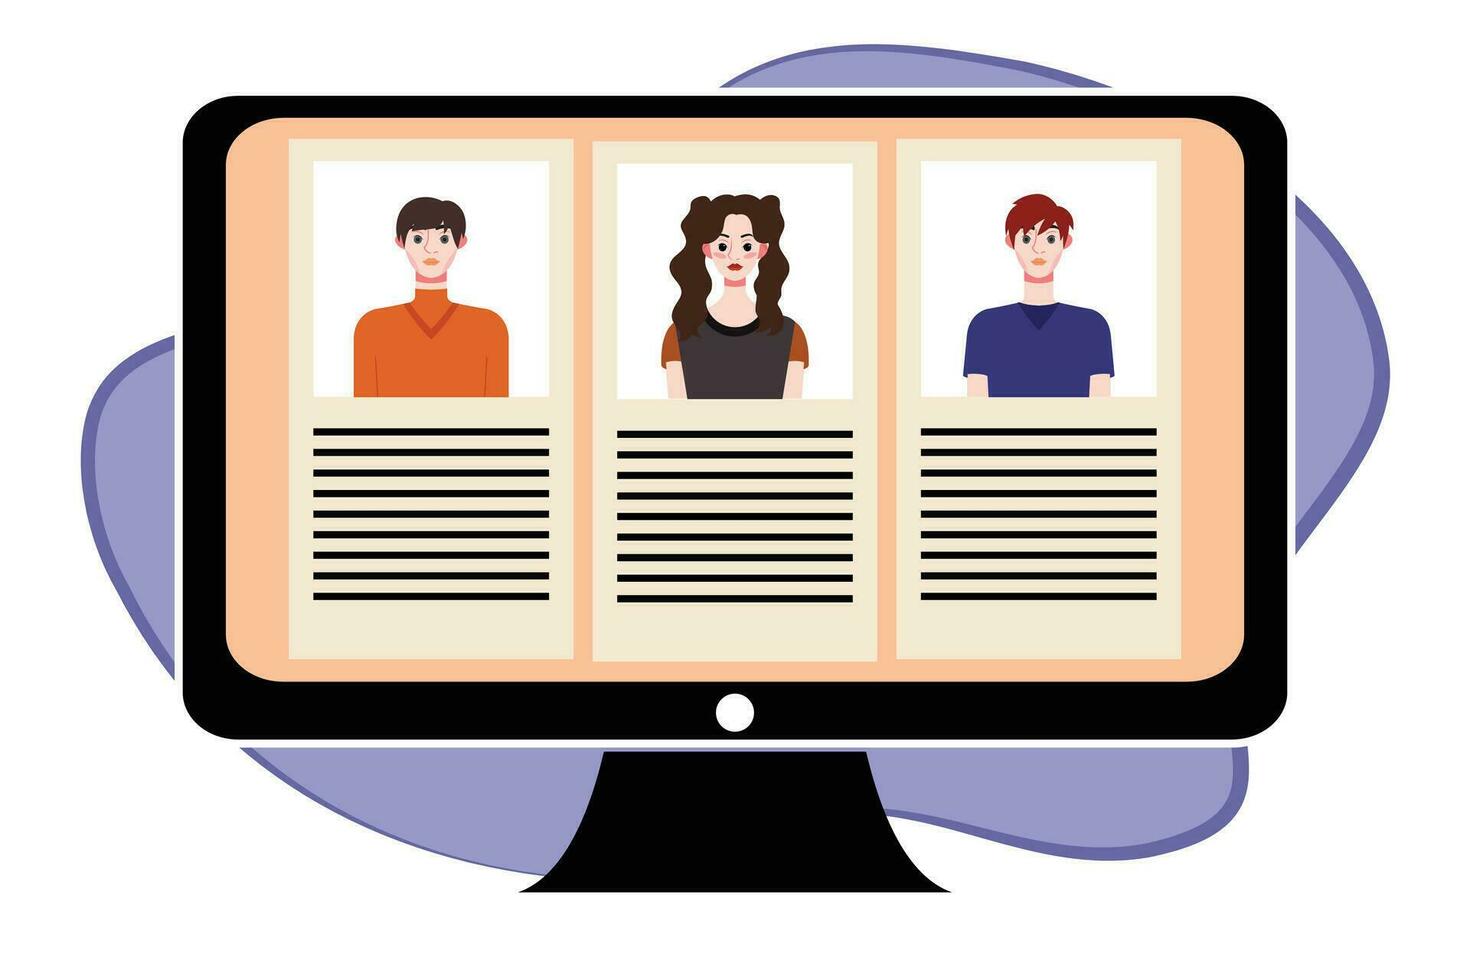 People in video conference on computer screen. Online meeting, video call concept. Vector illustration.